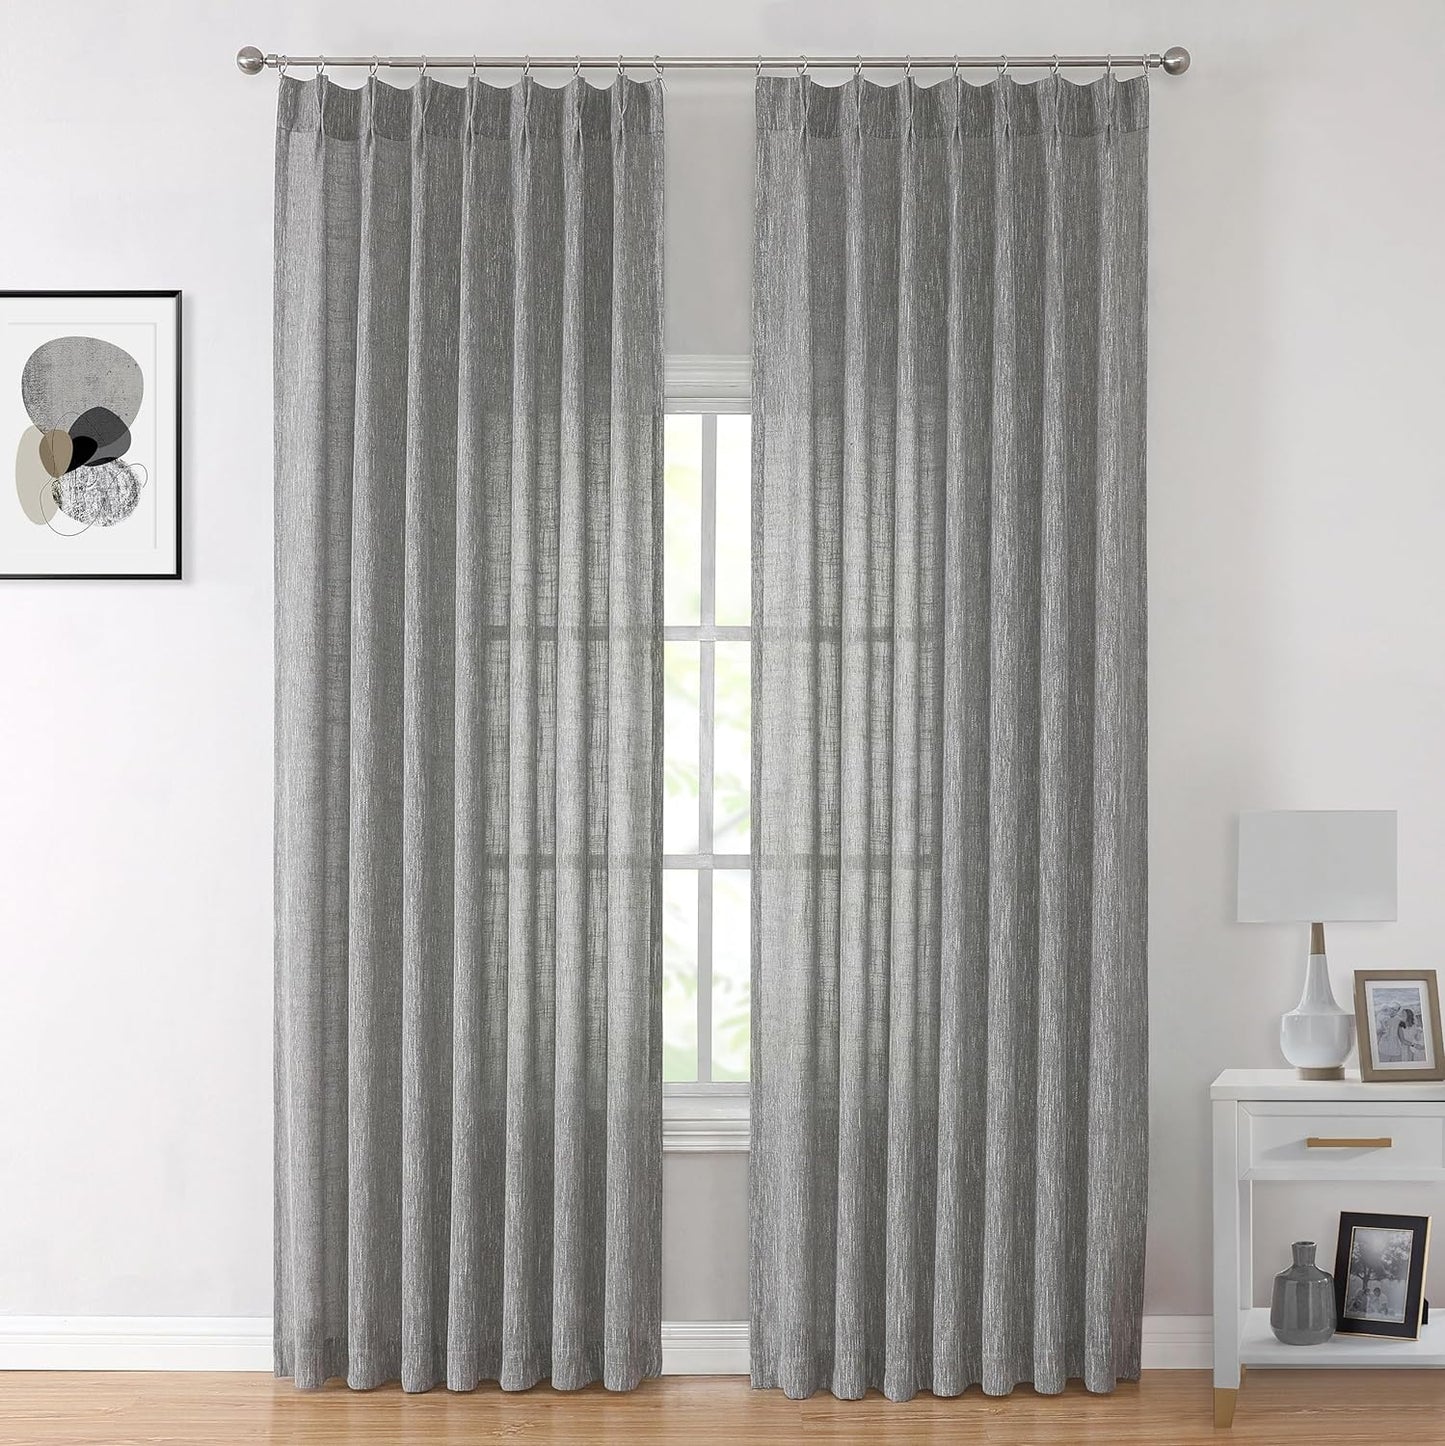 Vision Home Natural Pinch Pleated Semi Sheer Curtains Textured Linen Blended Light Filtering Window Curtains 84 Inch for Living Room Bedroom Pinch Pleat Drapes with Hooks 2 Panels 42" Wx84 L  Vision Home Charcoal Grey/Pinch 40"X84"X2 